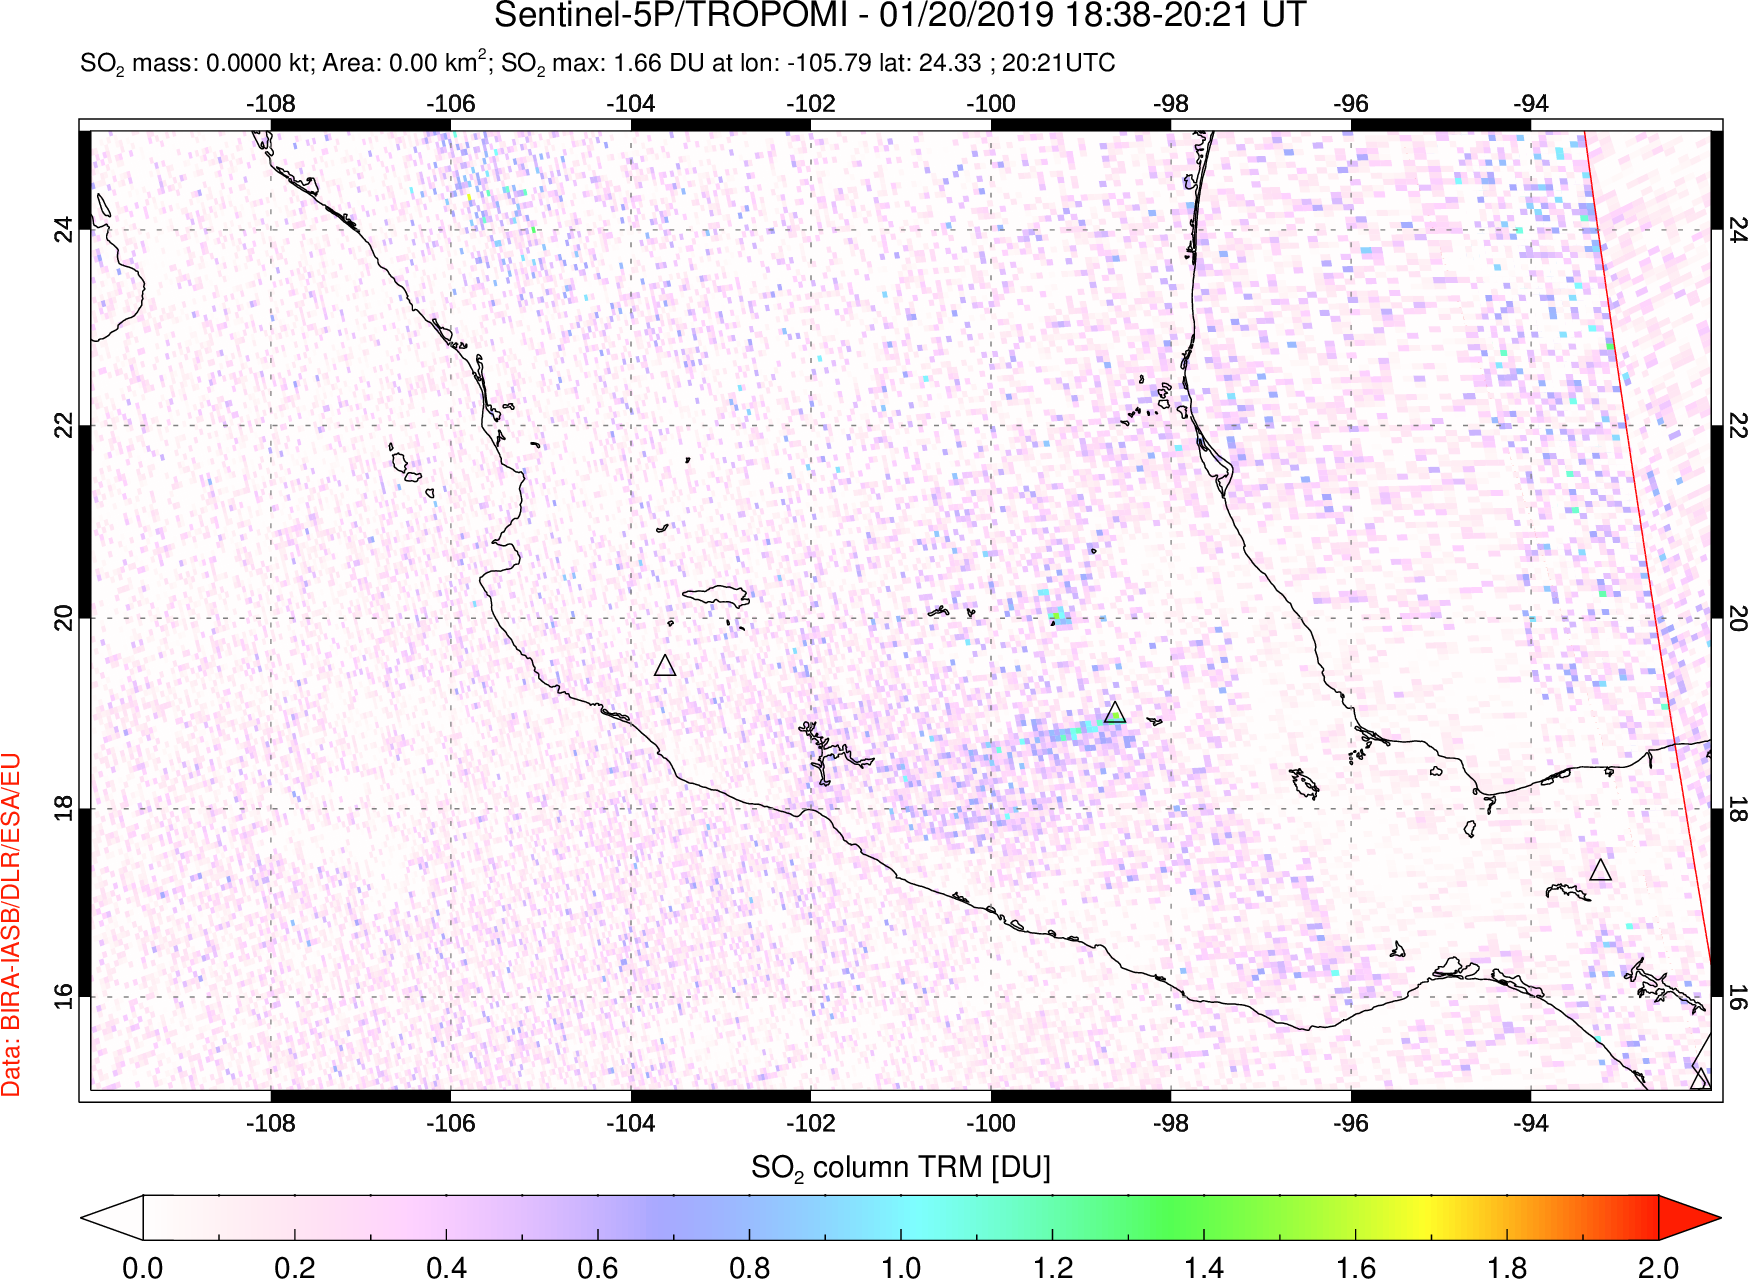 A sulfur dioxide image over Mexico on Jan 20, 2019.